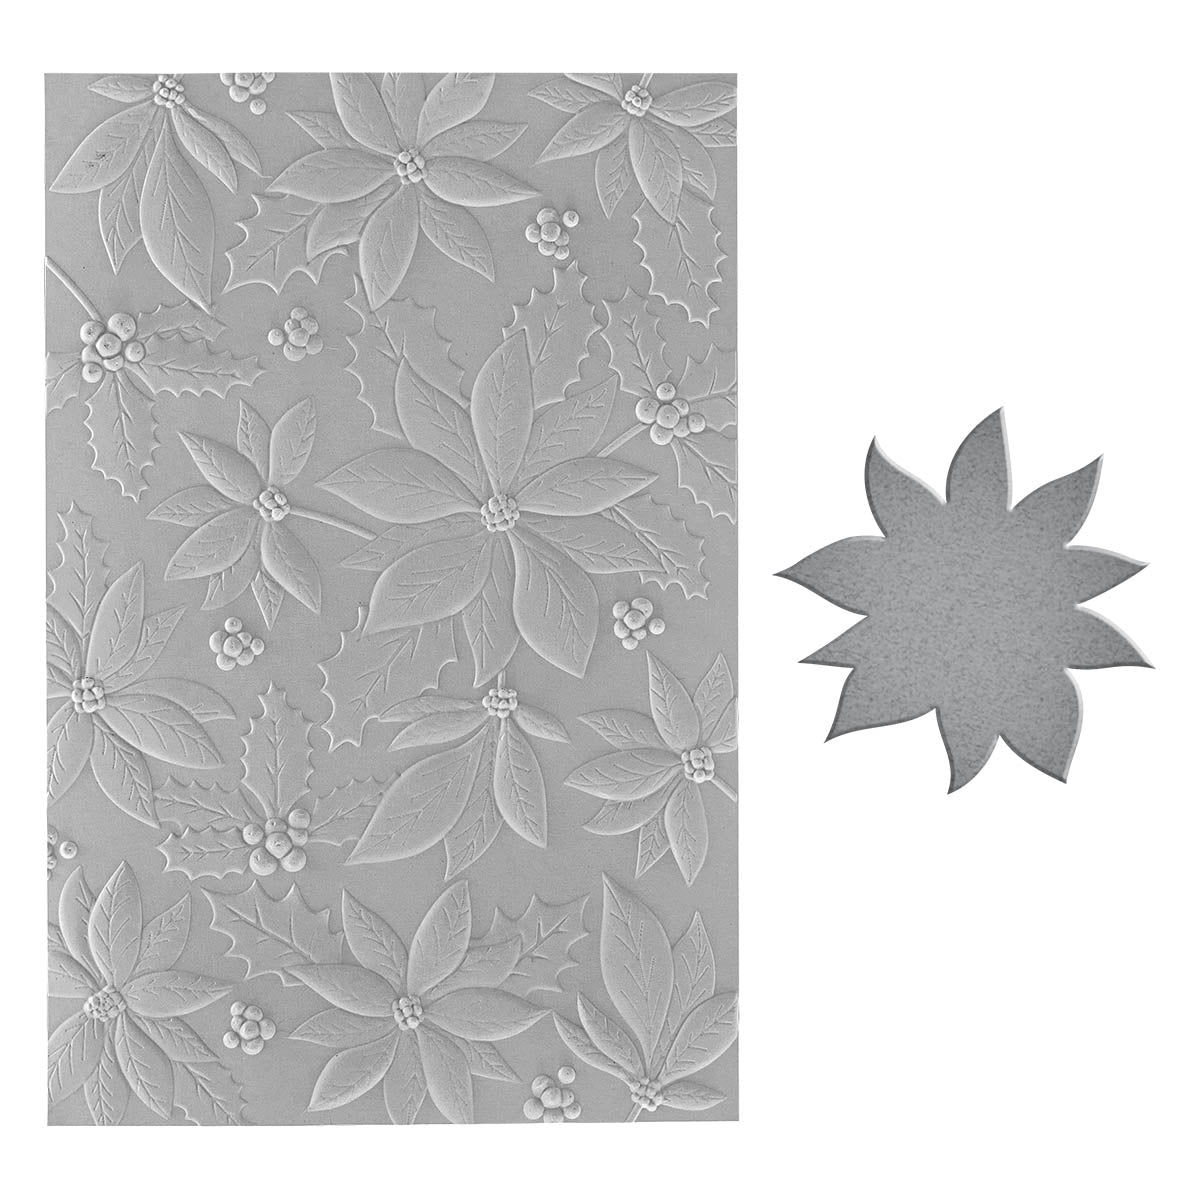 Spellbinders - Playful Poinsettia 3D Embossing Folder from the Simon's Snow Globes Collection by Simon Hurley